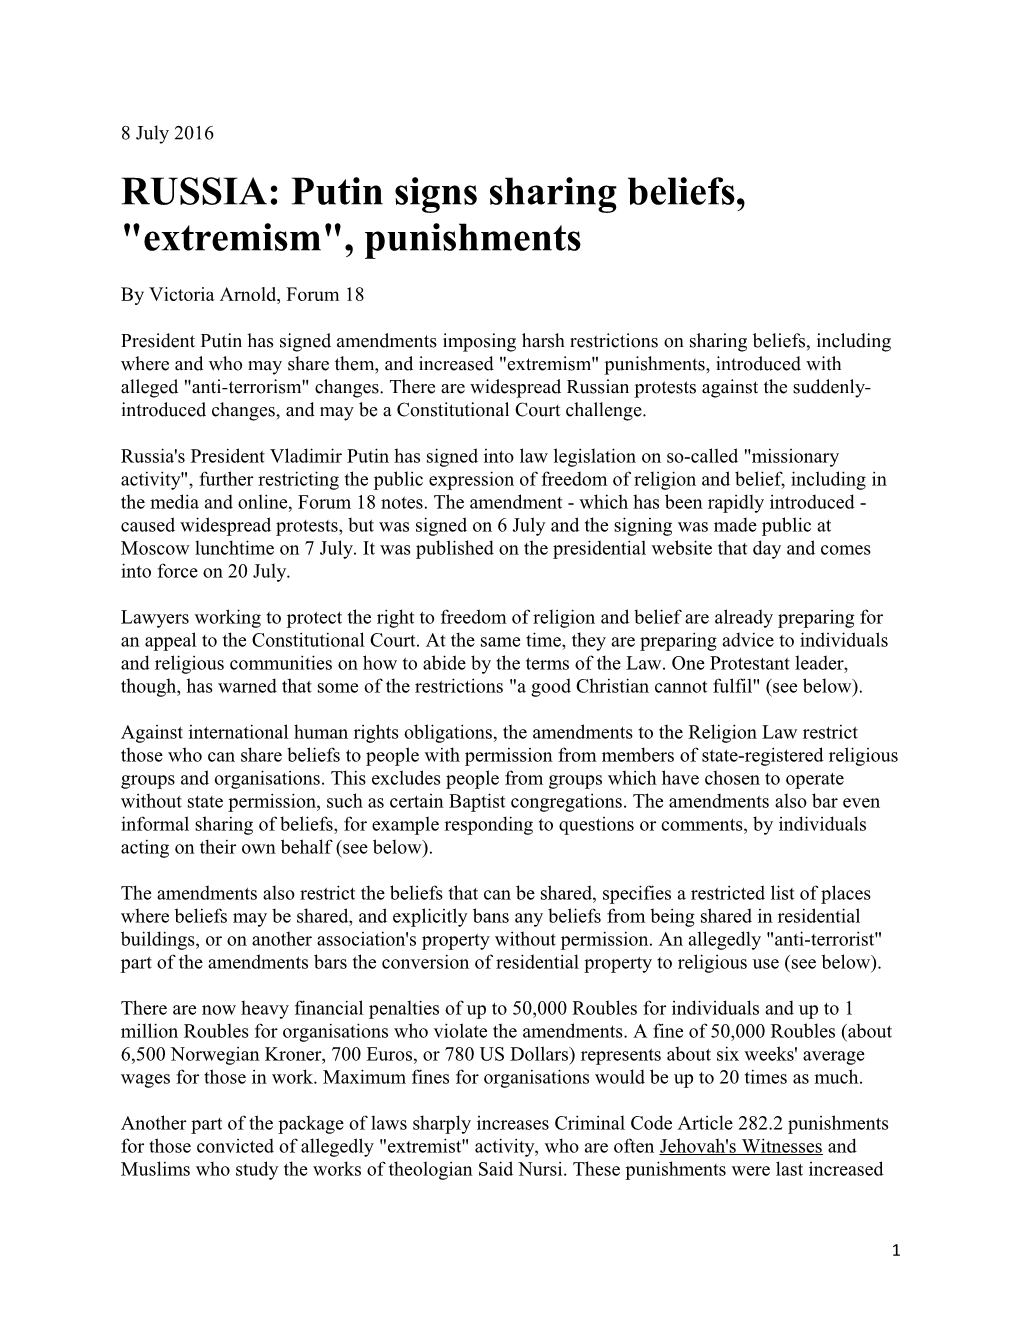 RUSSIA: Putin Signs Sharing Beliefs, Extremism , Punishments